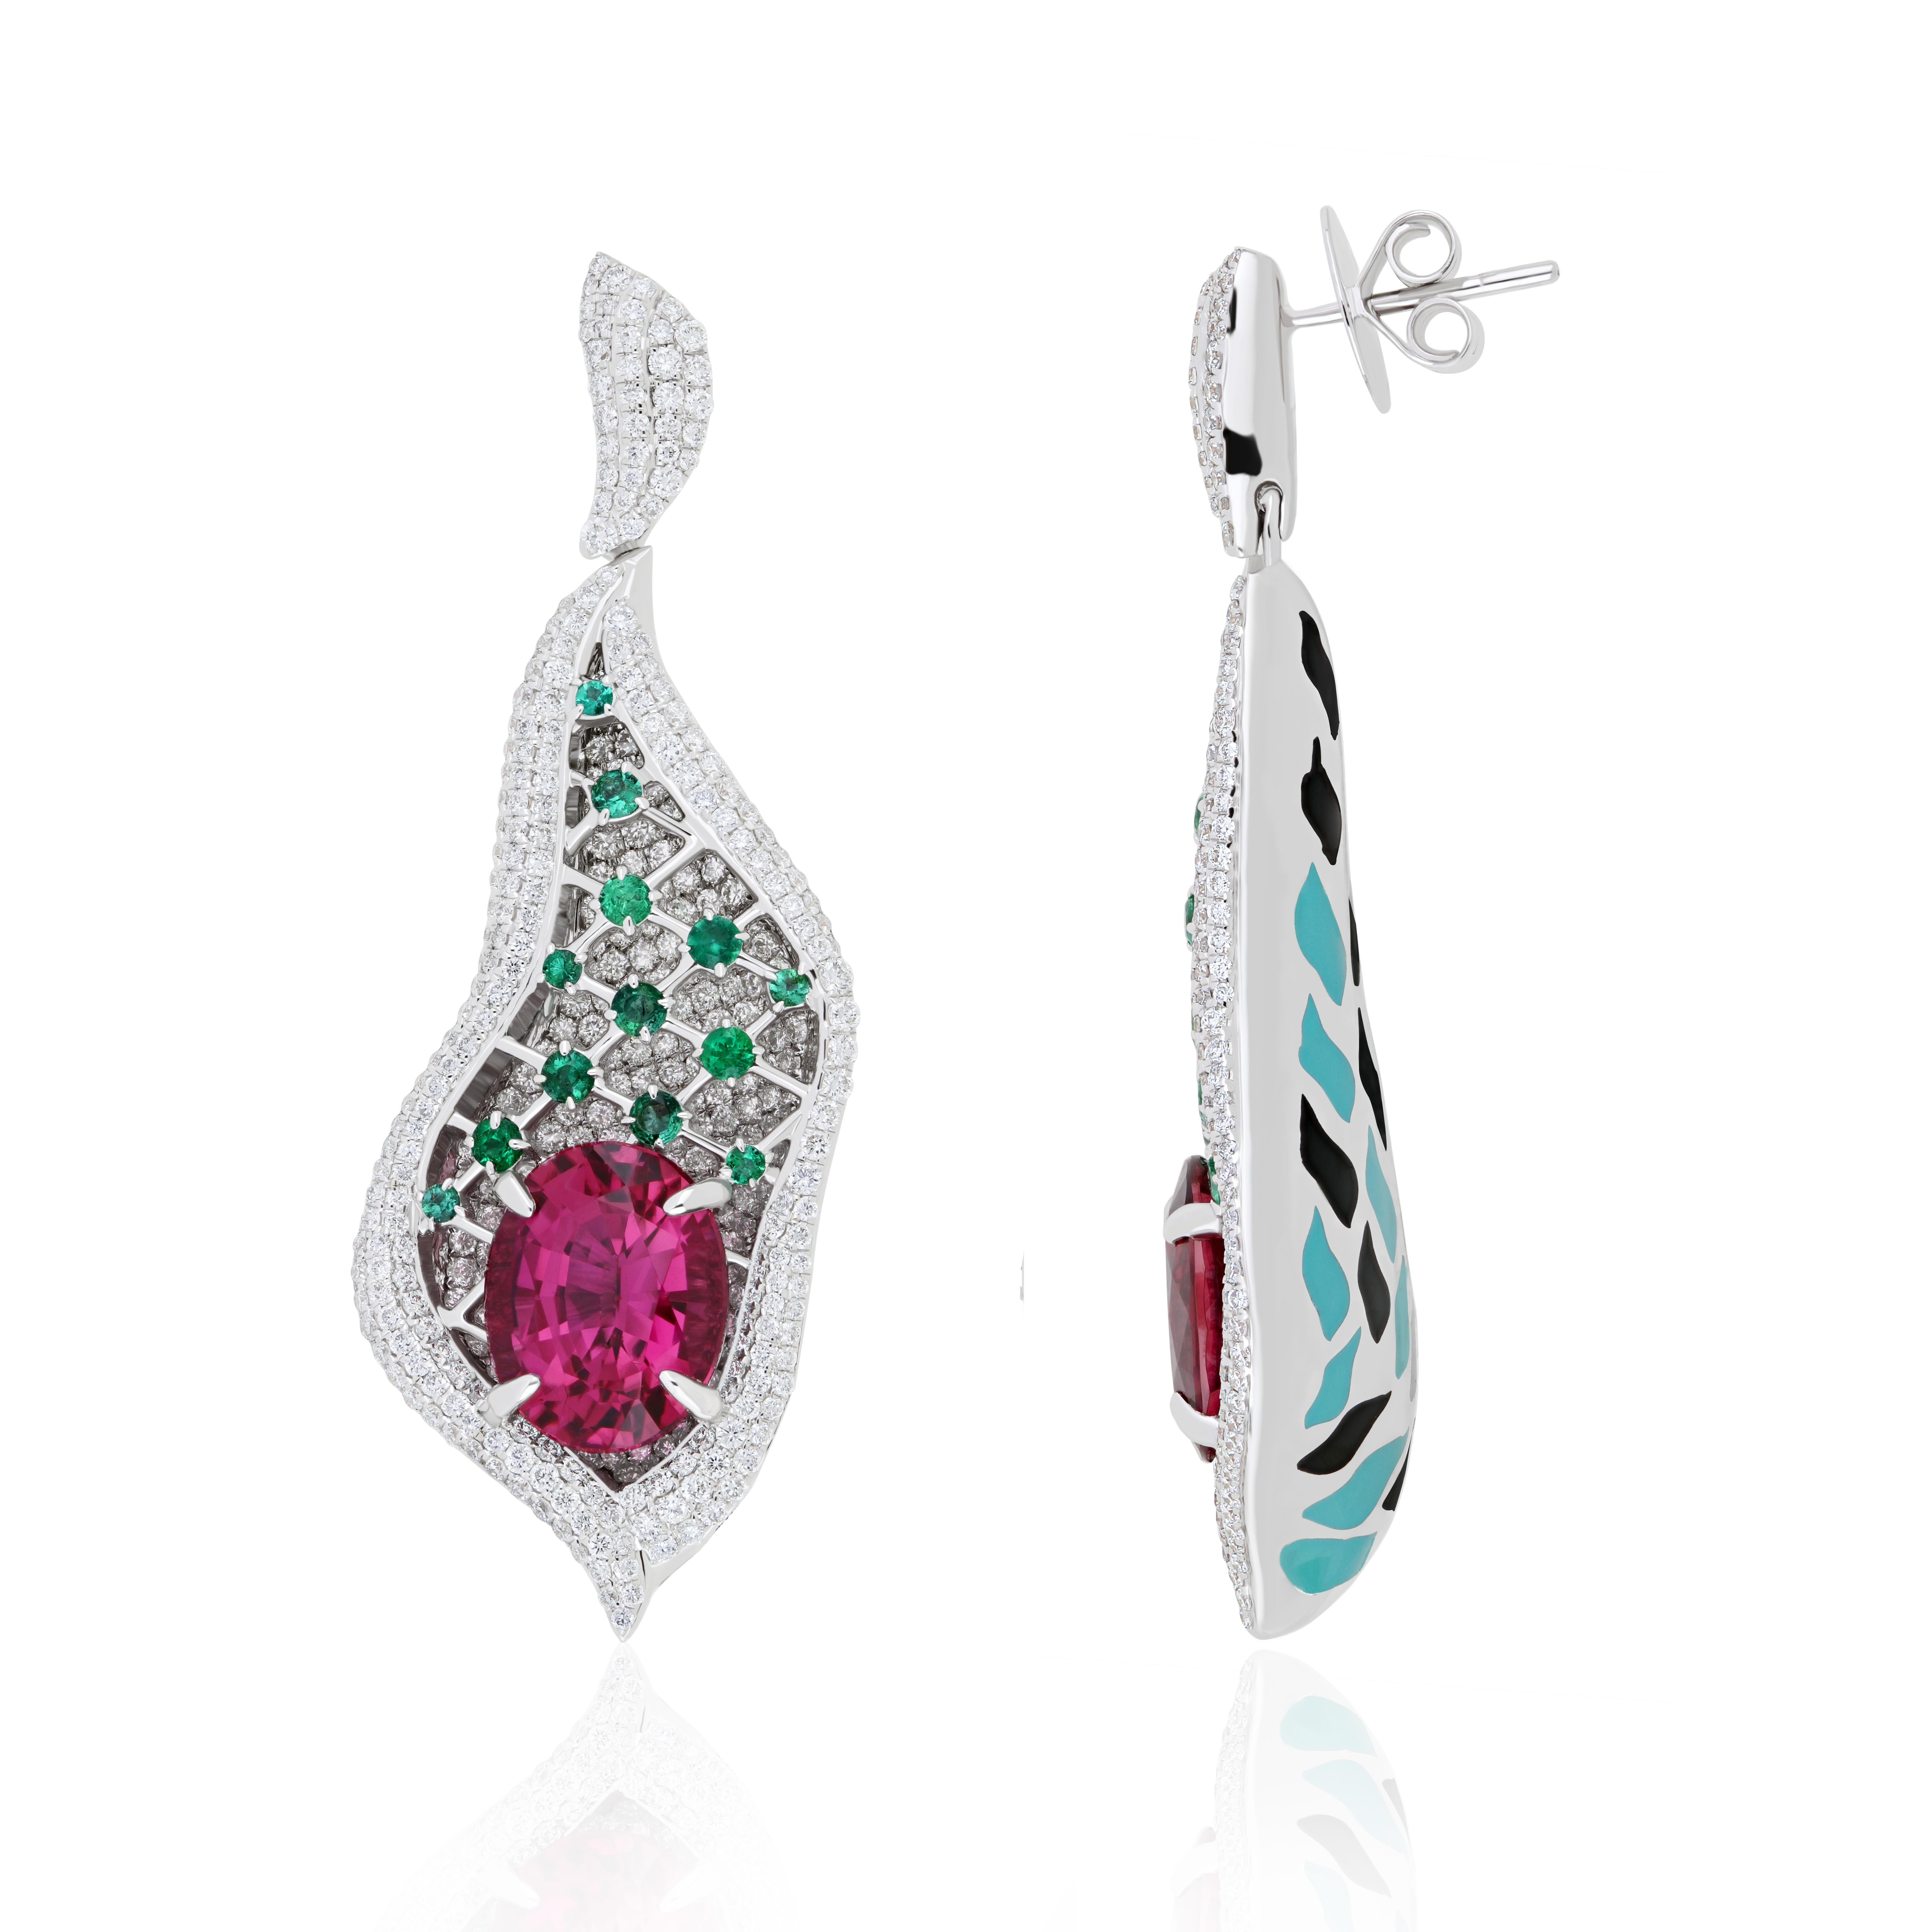 Elegant and Exquisitely detailed Gold Earring with 8.3 Cts (approx.) Oval shape Rubellite set with contrasting Vibrant Green Emeralds accented with Micro pave set Diamonds, weighing approx.  4.6 CT's (approx.). total carat weight to further enhance